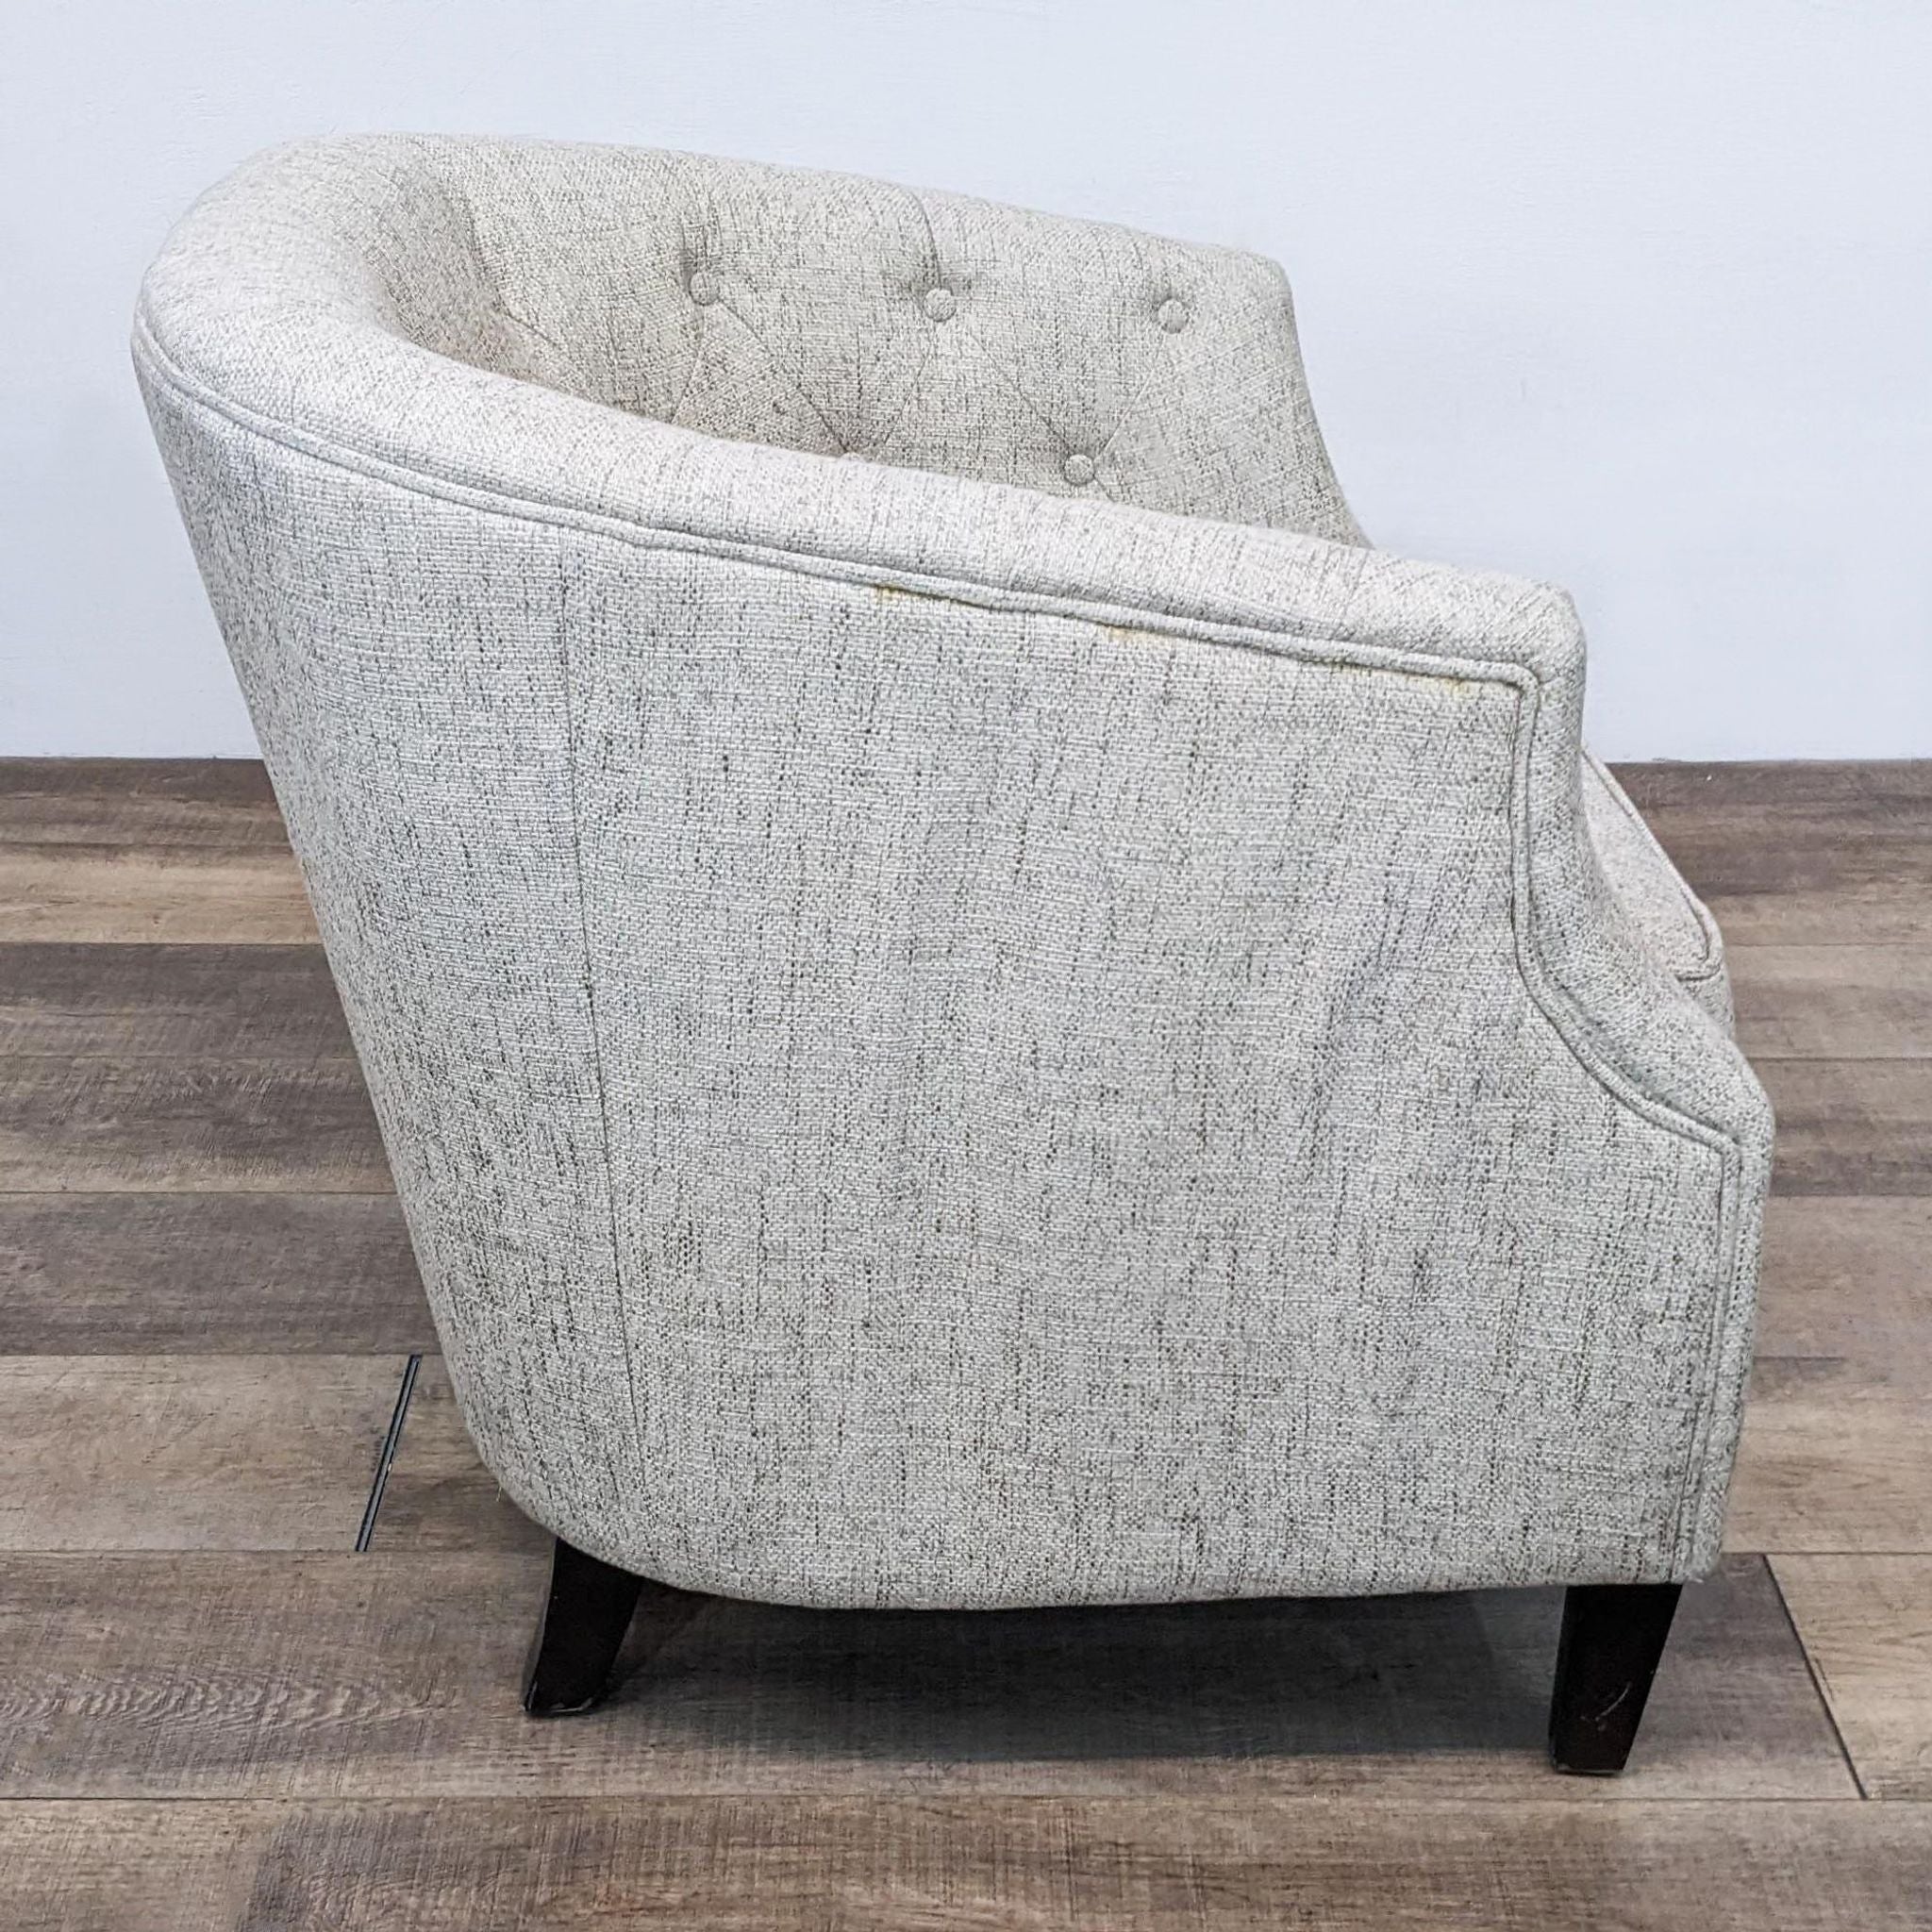 Reperch barrel back chair featuring tufted upholstery and wood legs, in a side and back perspective.